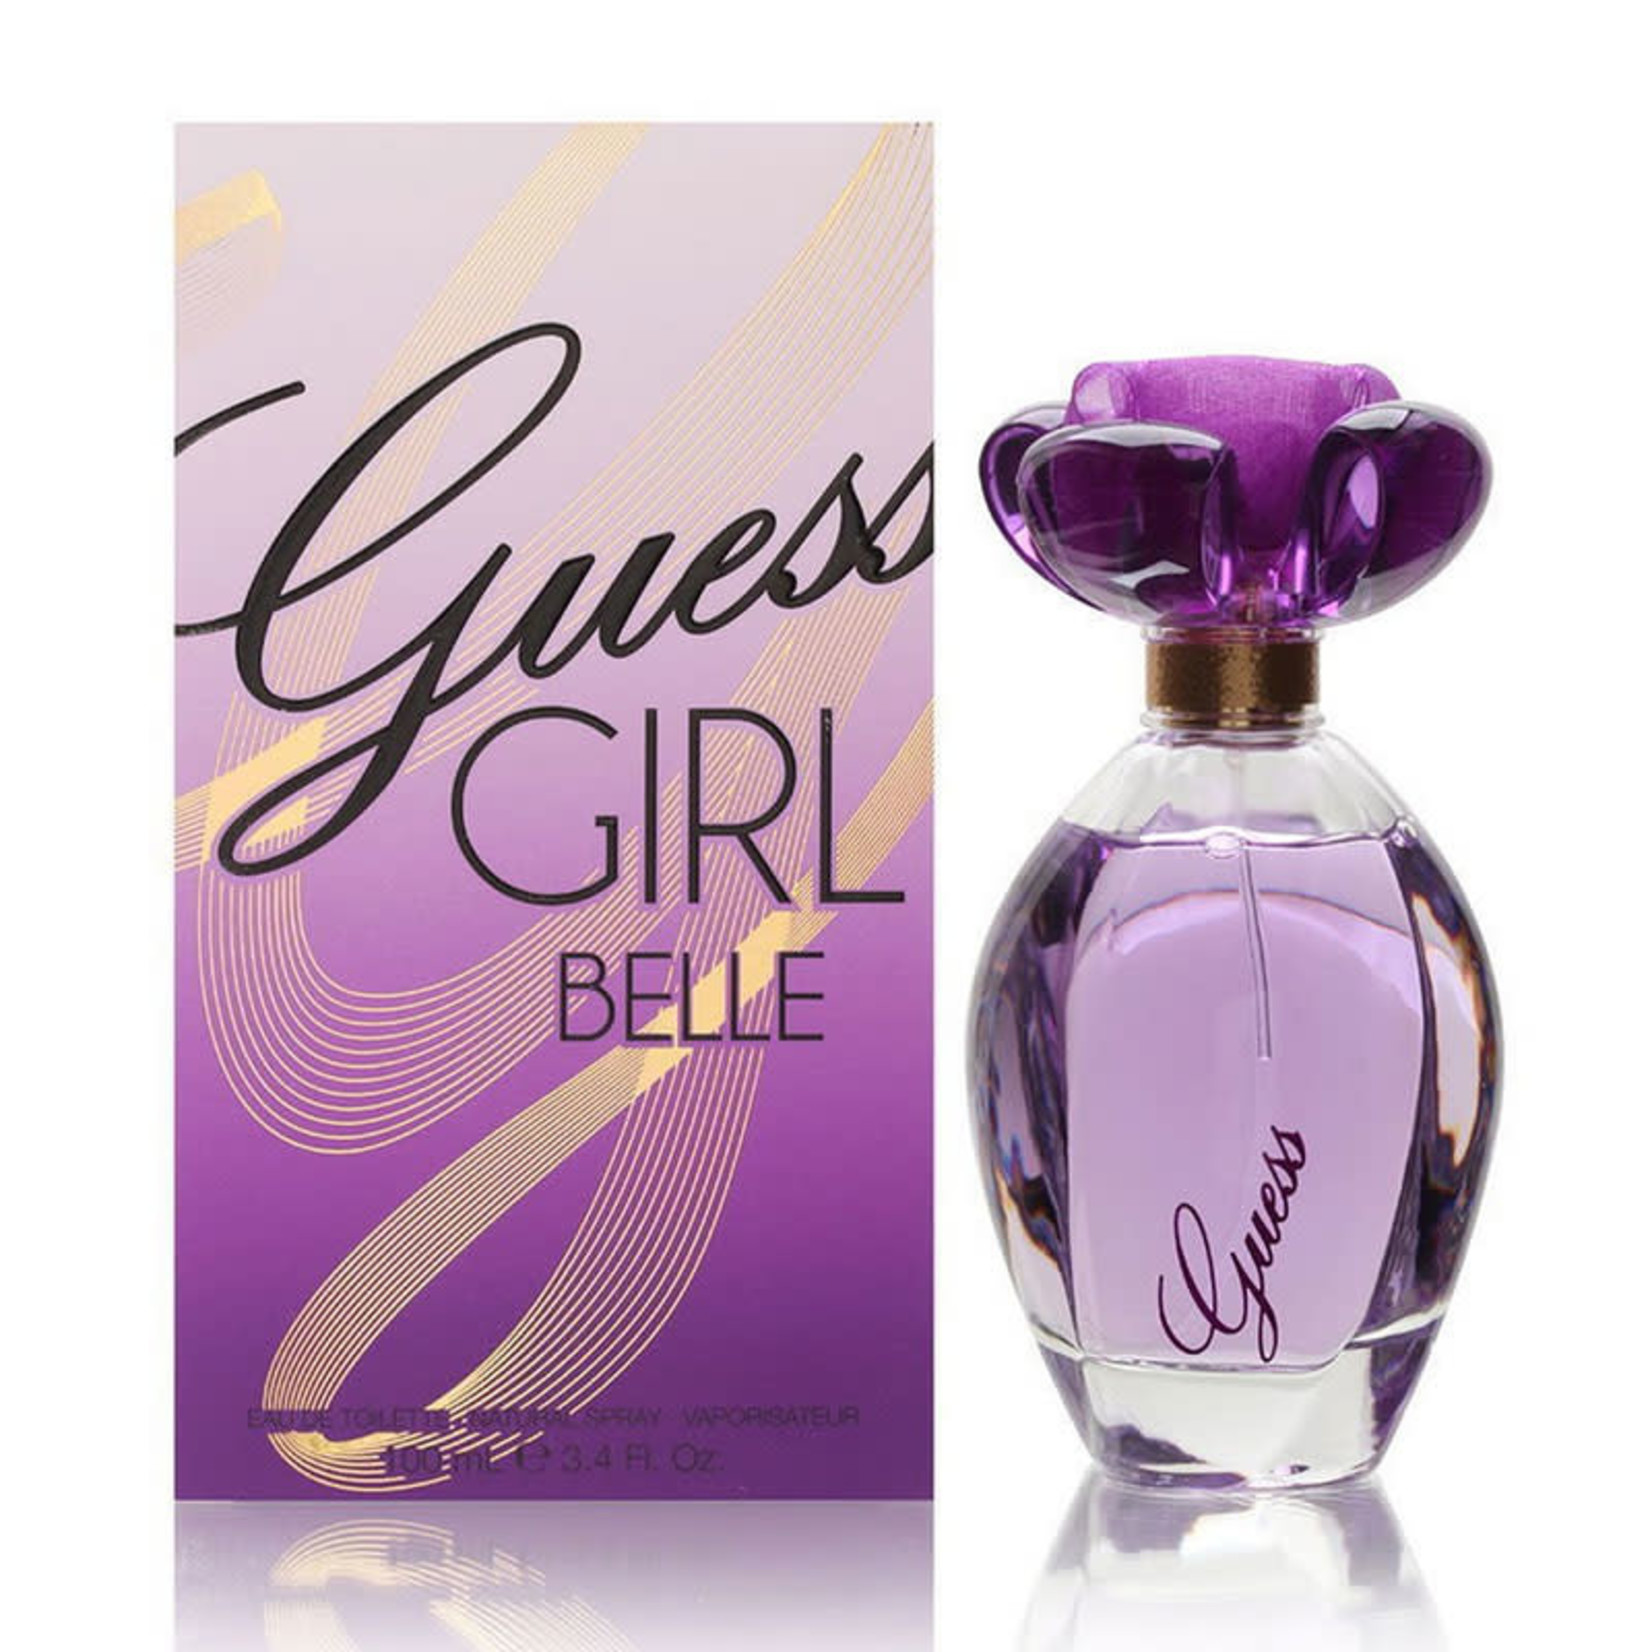 GUESS GUESS GIRL BELLE 100ML EDT